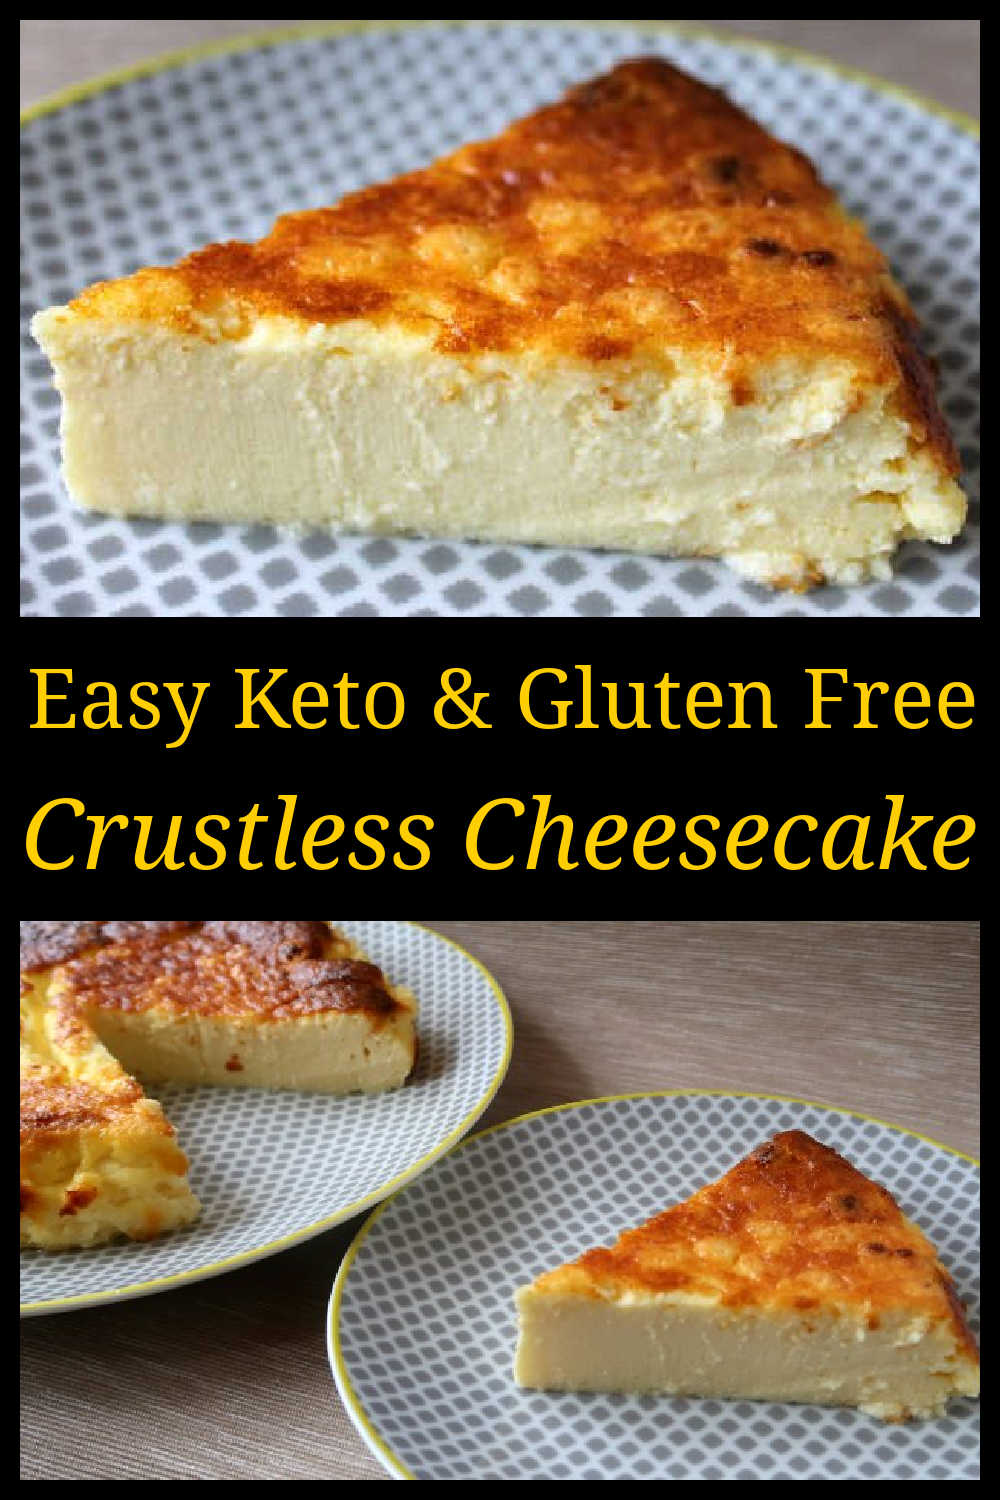 Crustless Cheesecake Recipe - Best Easy Creamy Low Carb, Keto and Gluten Free Baked Dessert inspired by the no-crust Basque Burnt Cheesecake - with the video tutorial.